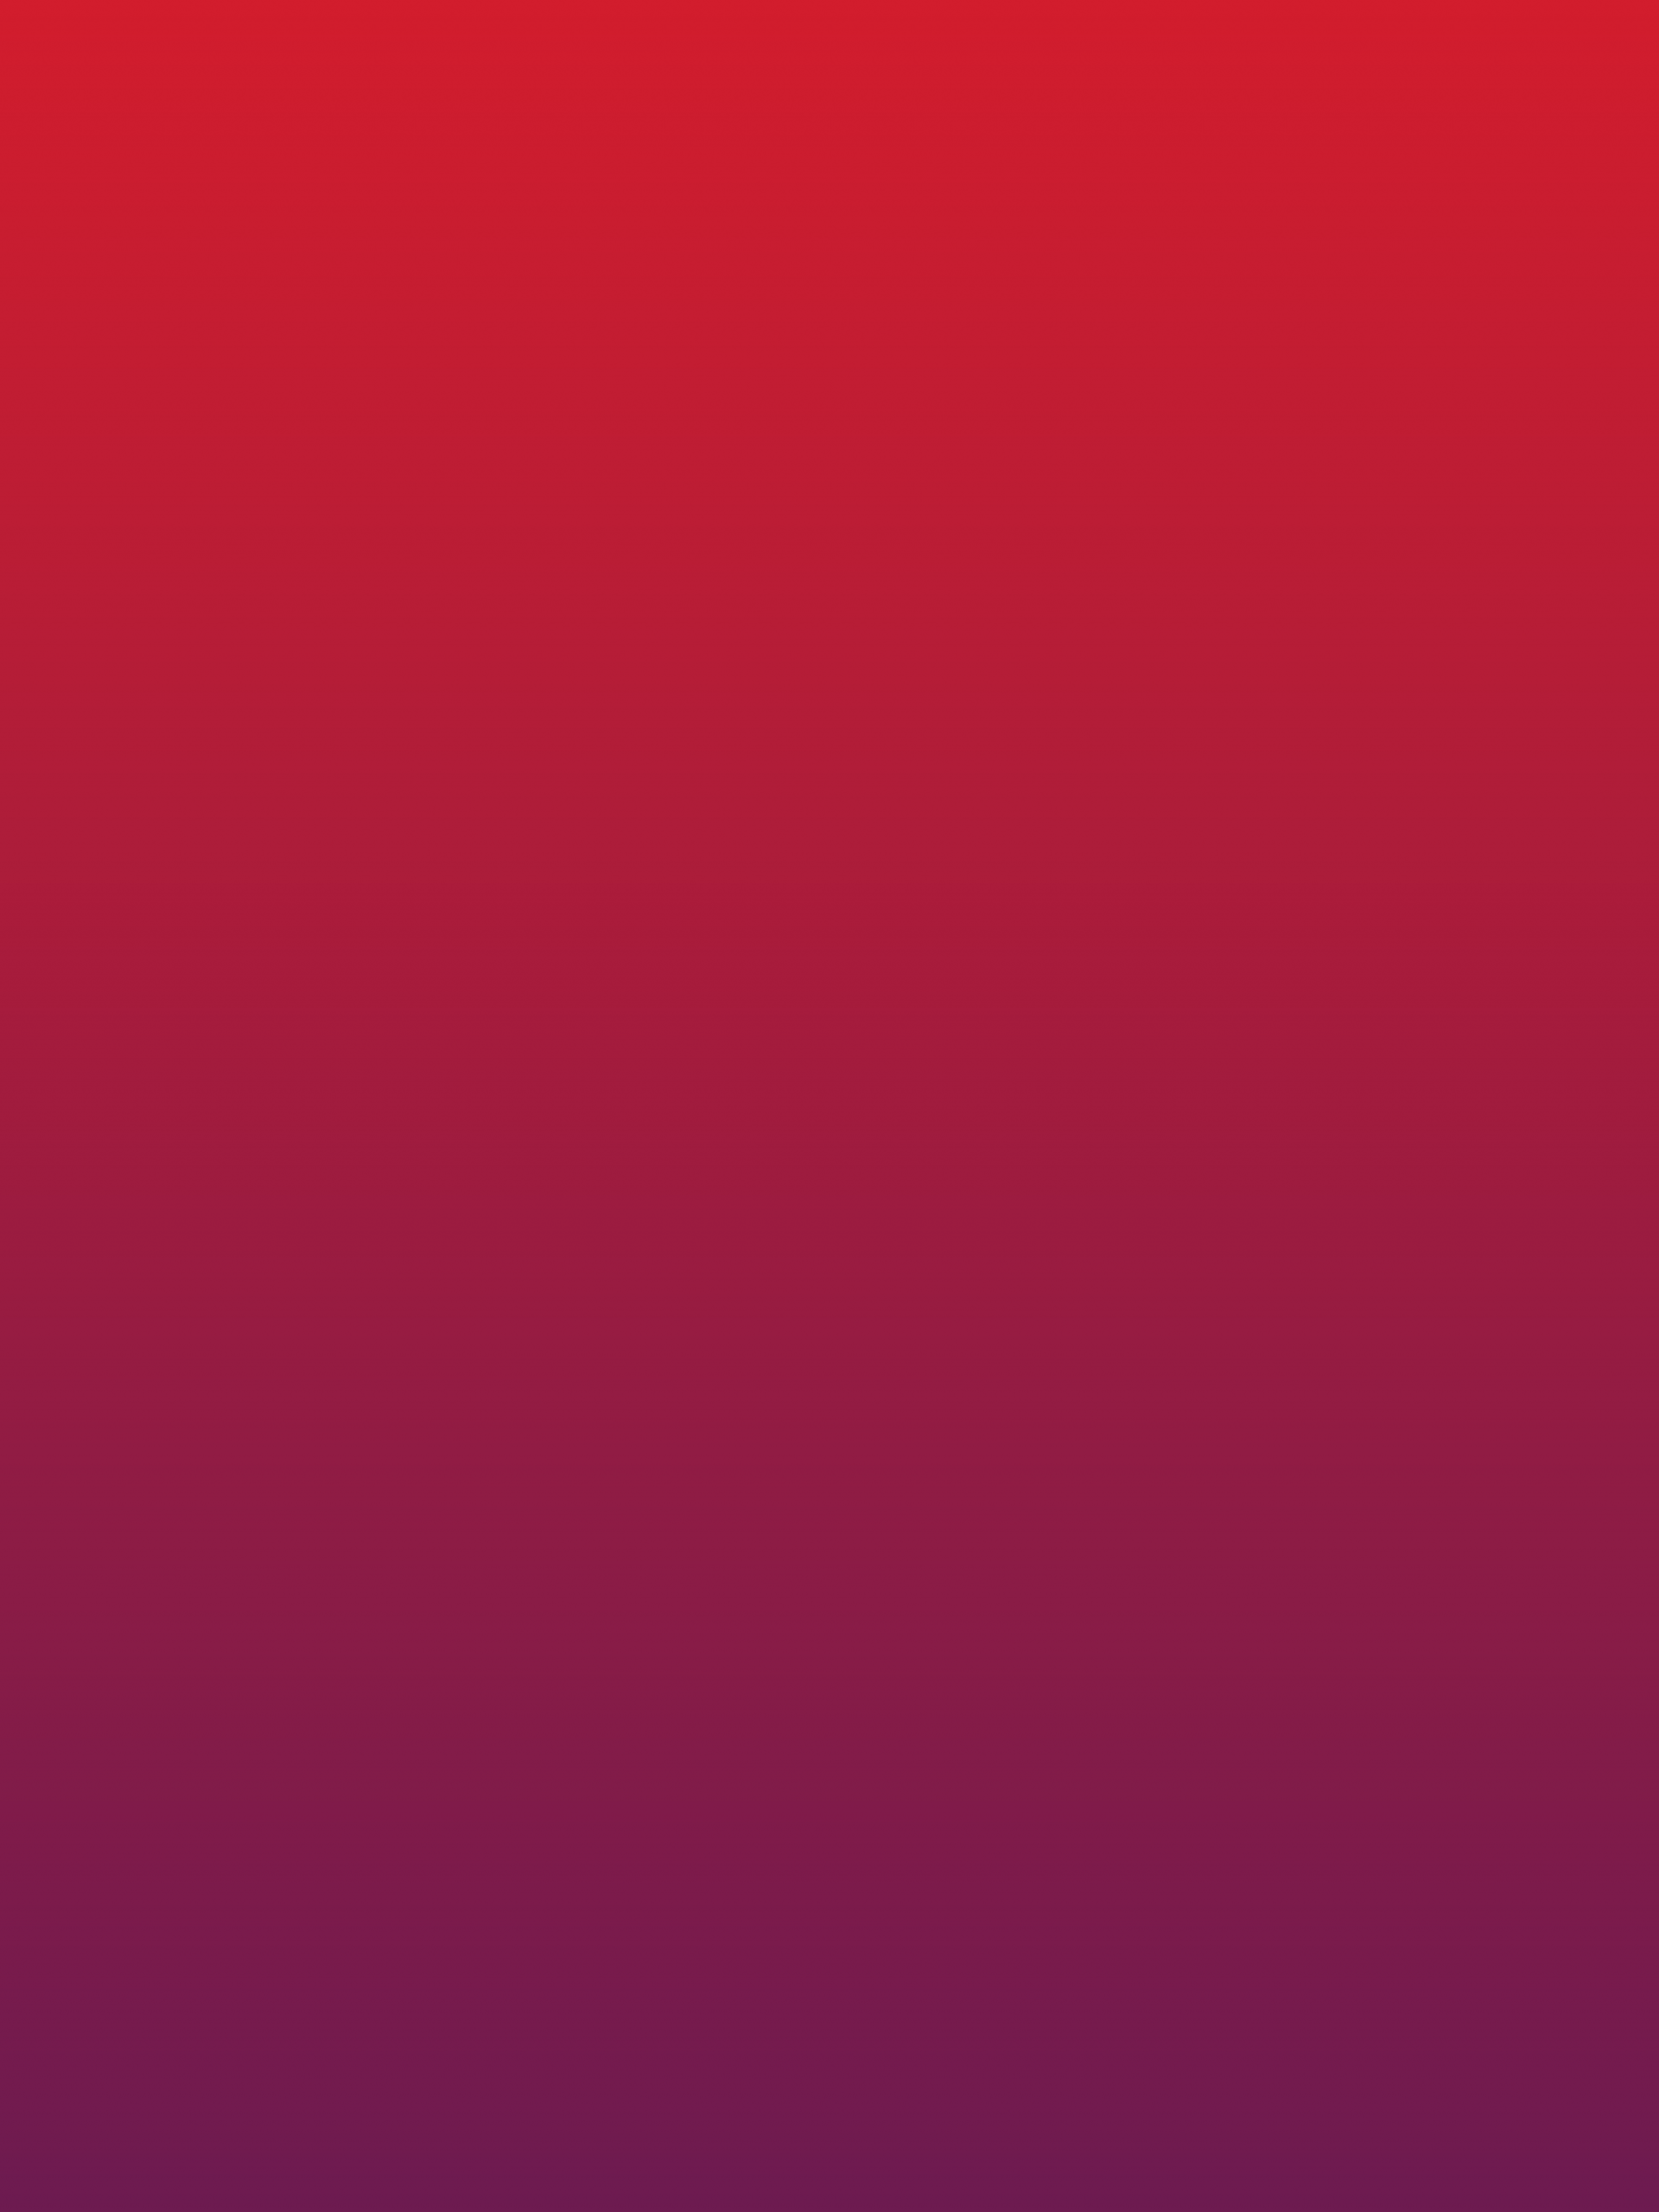 red to purple fade background